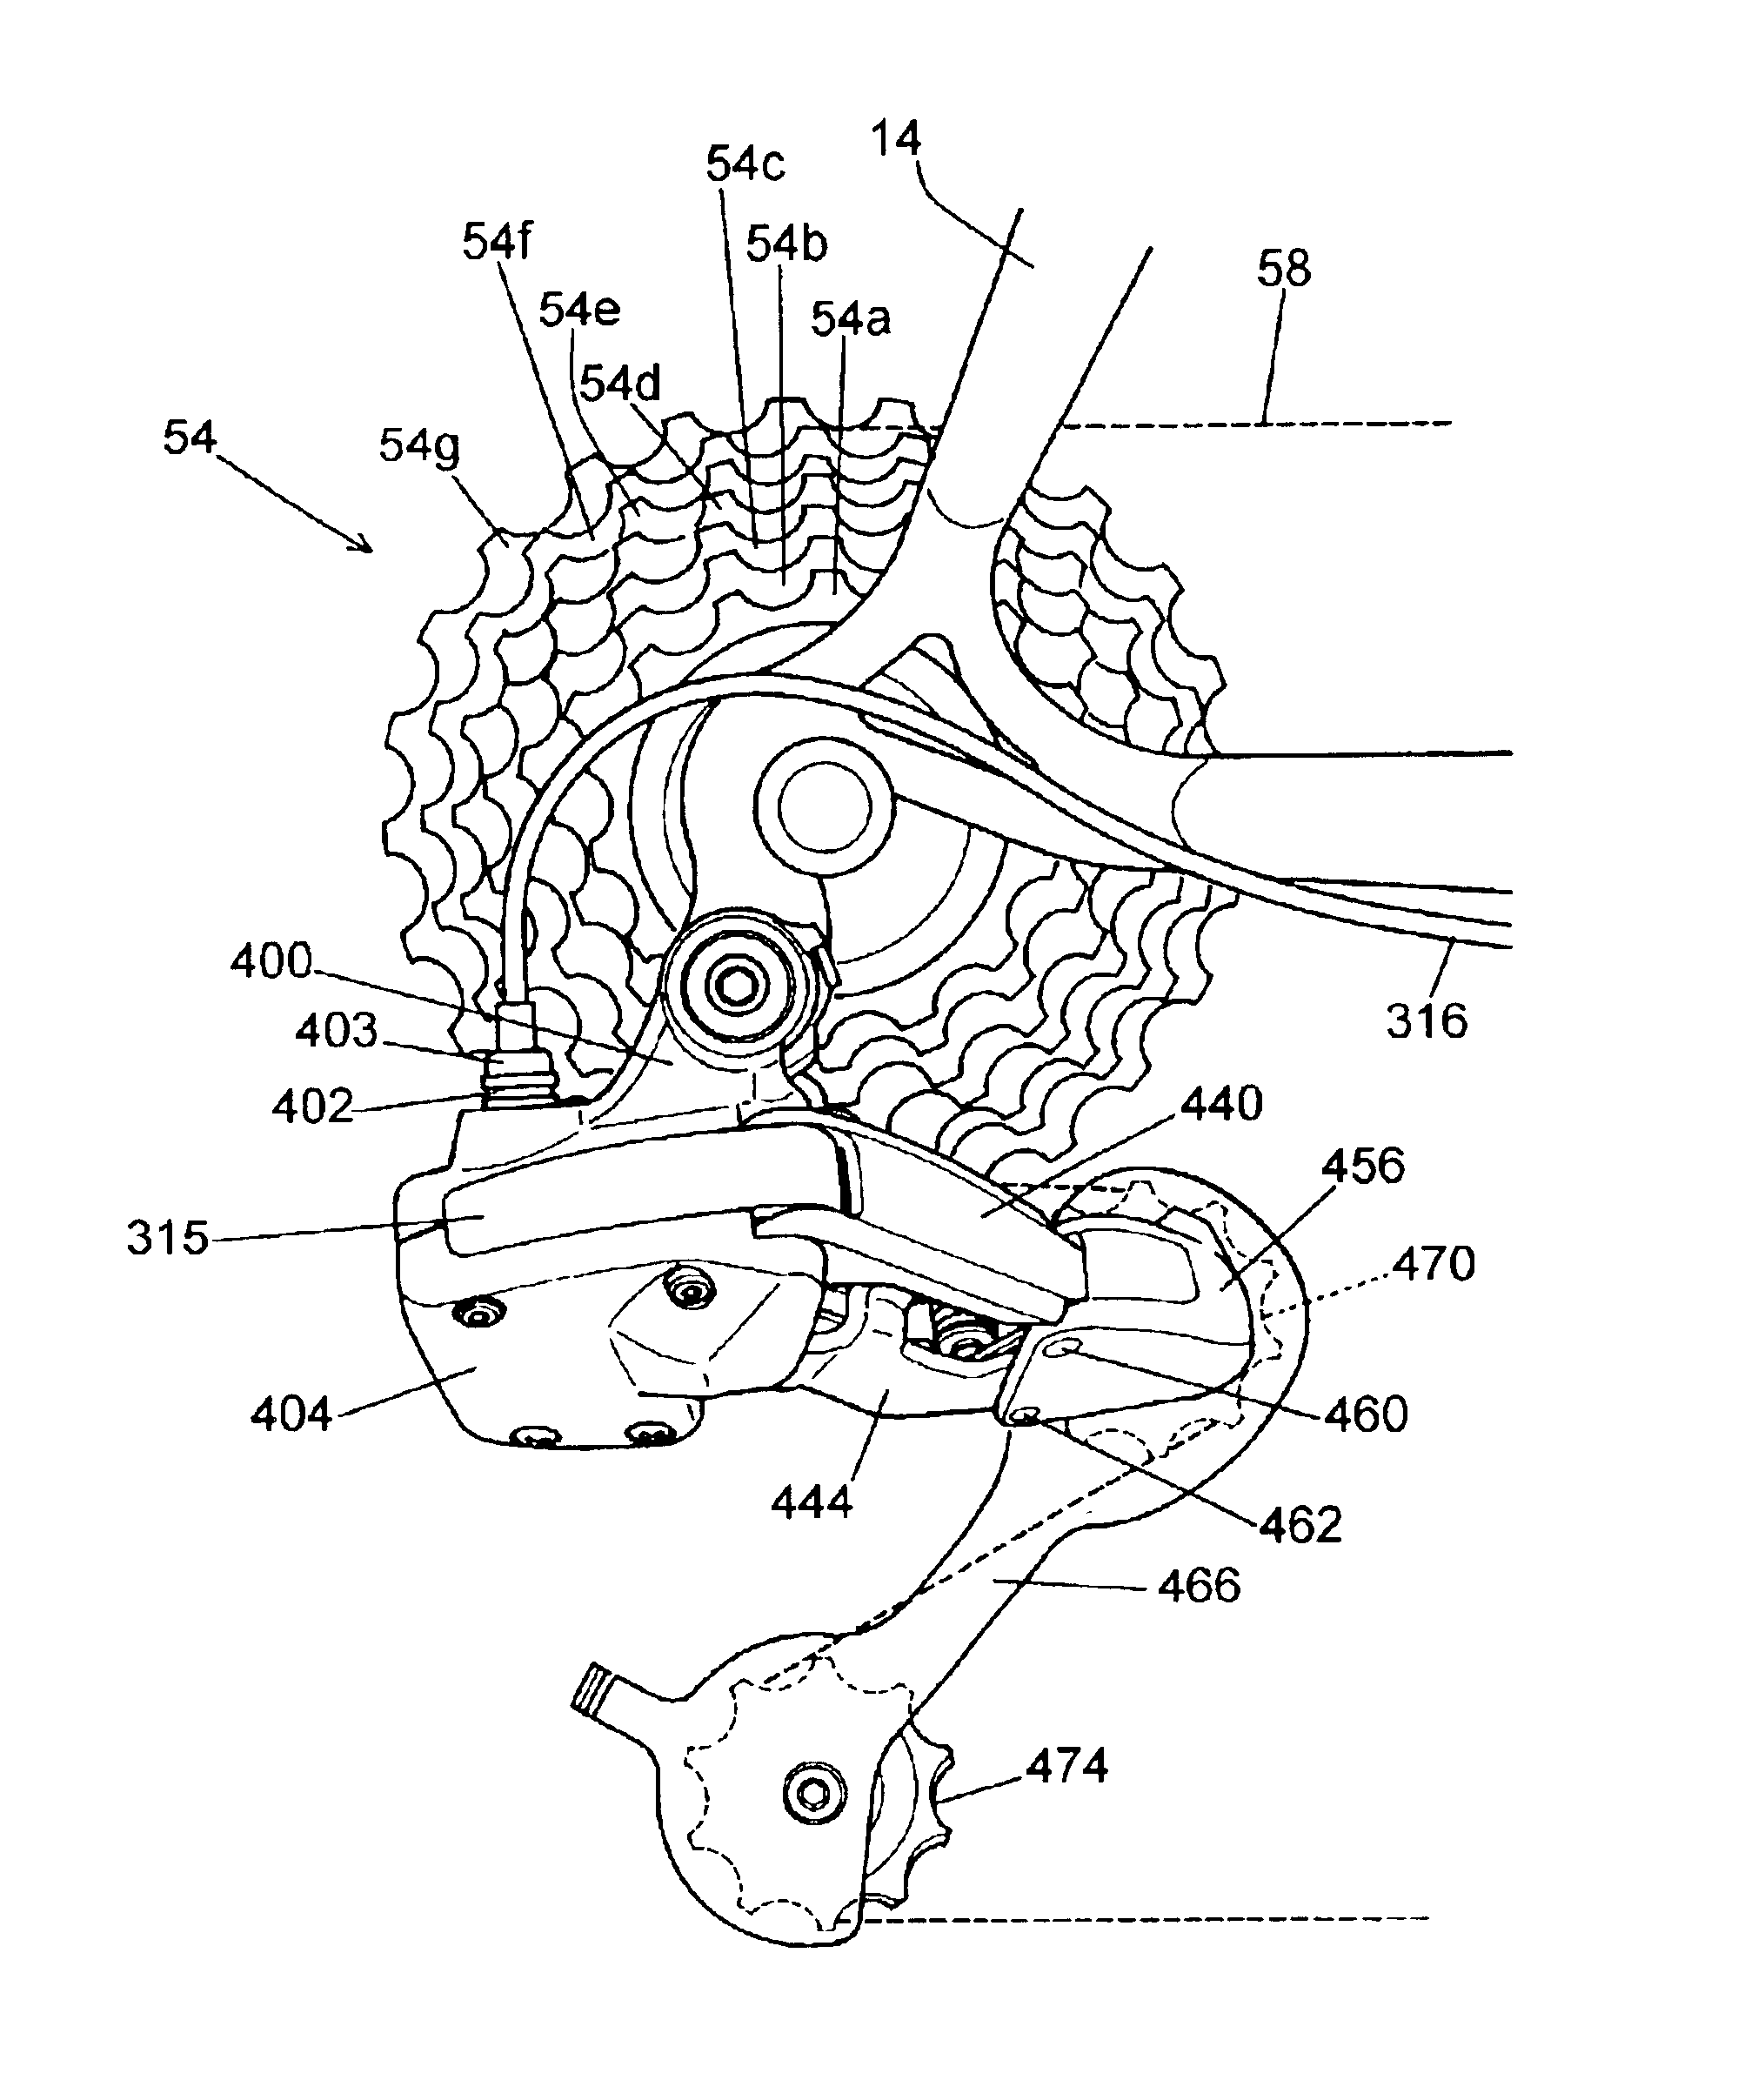 Combined analog and digital derailleur position processing apparatus